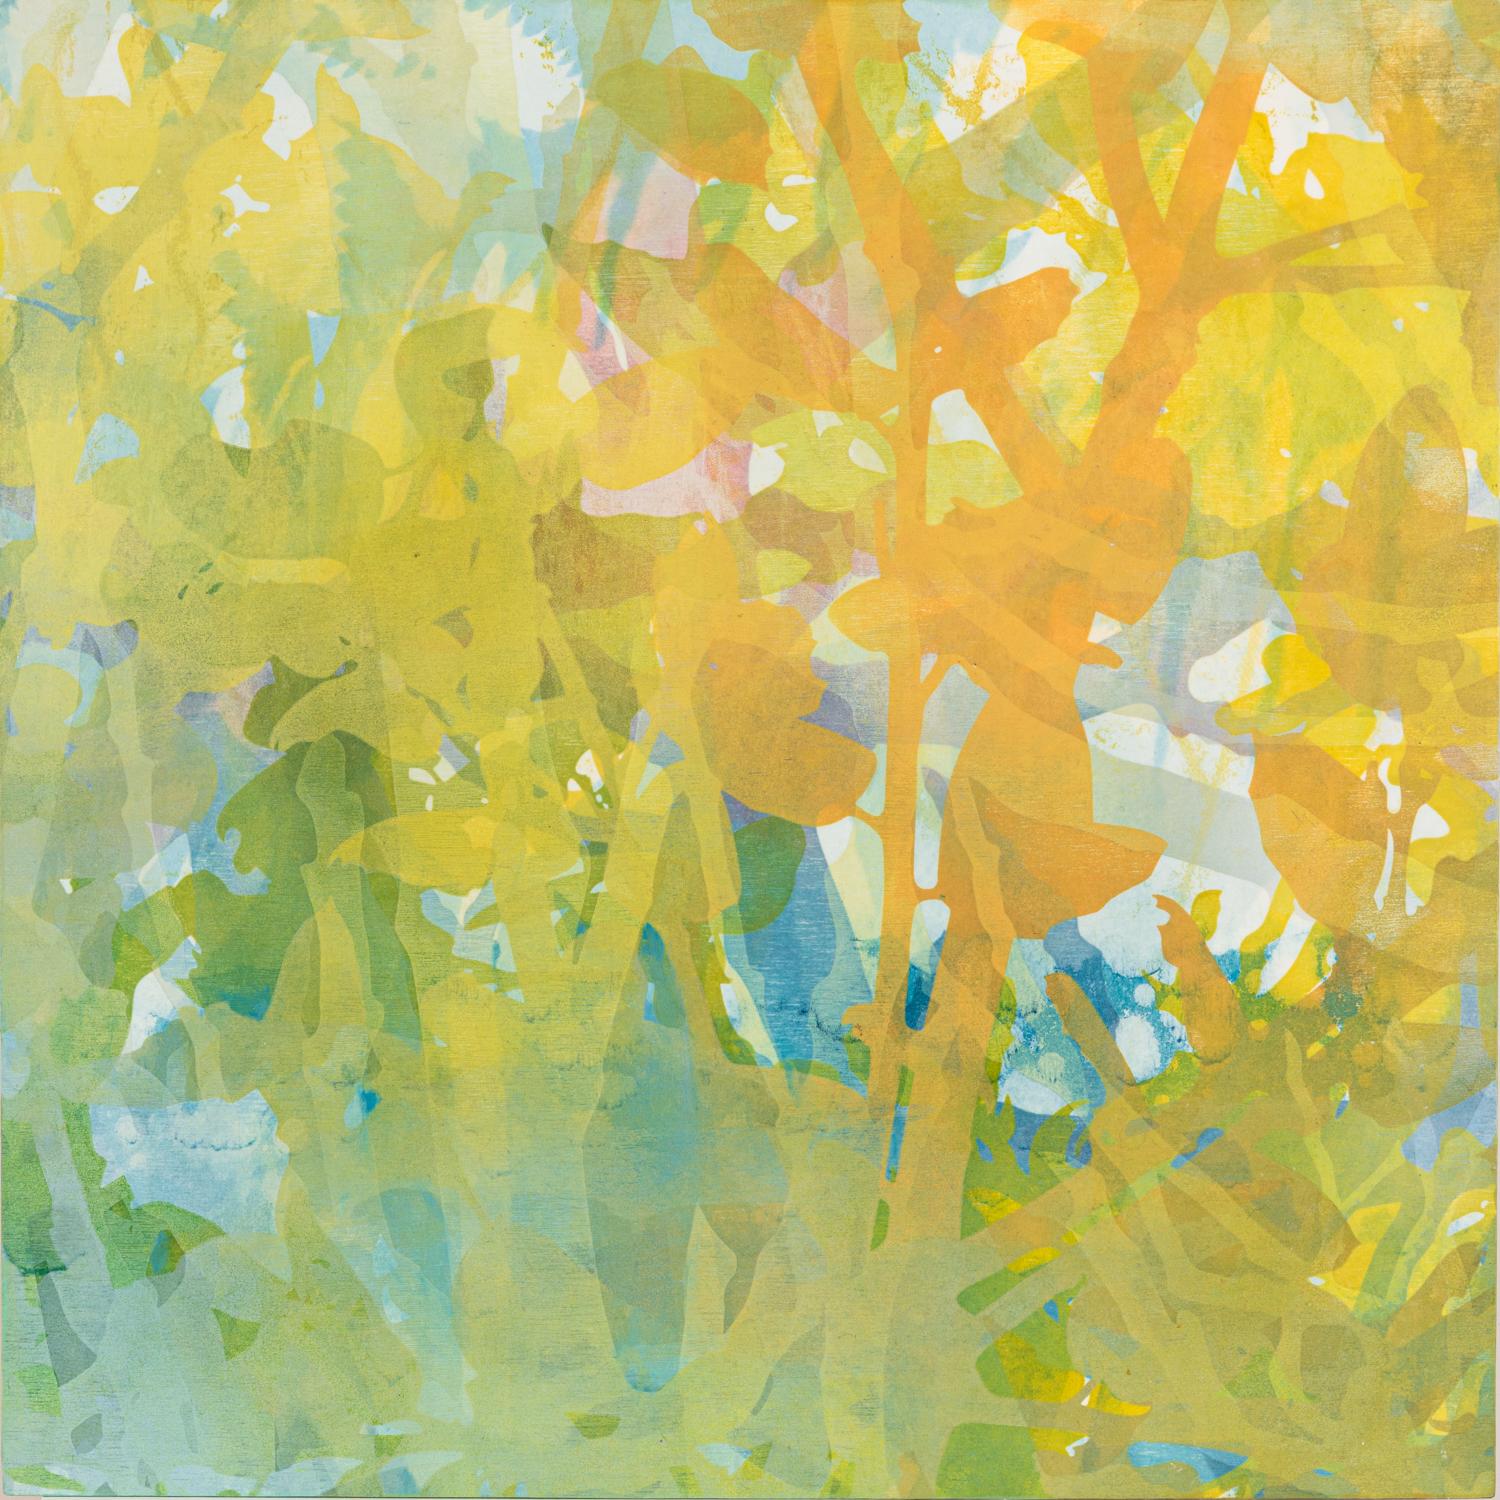 Katherine Warinner Landscape Print - "Thicket 4" - Multi-layered Branches and Foliage in Yellow Green Blue